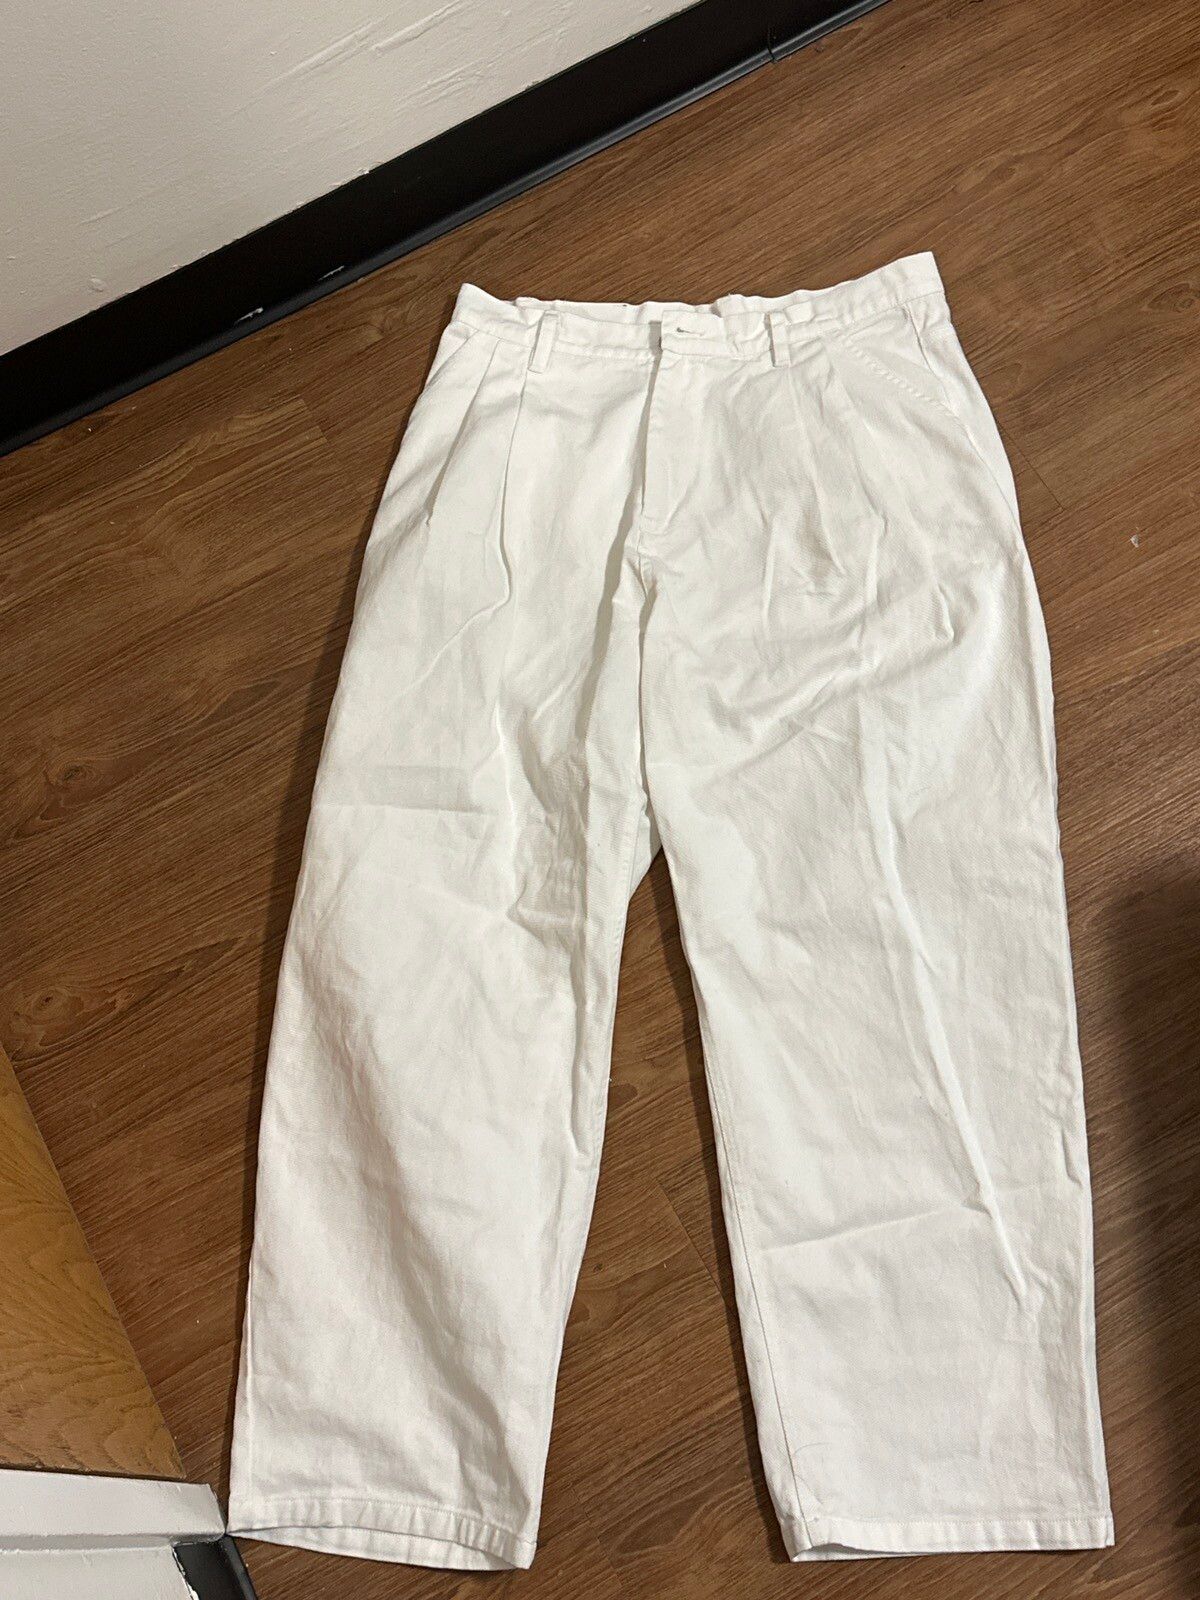 Other Korean Brand White Wide Pants Size US 34 / EU 50 - 1 Preview